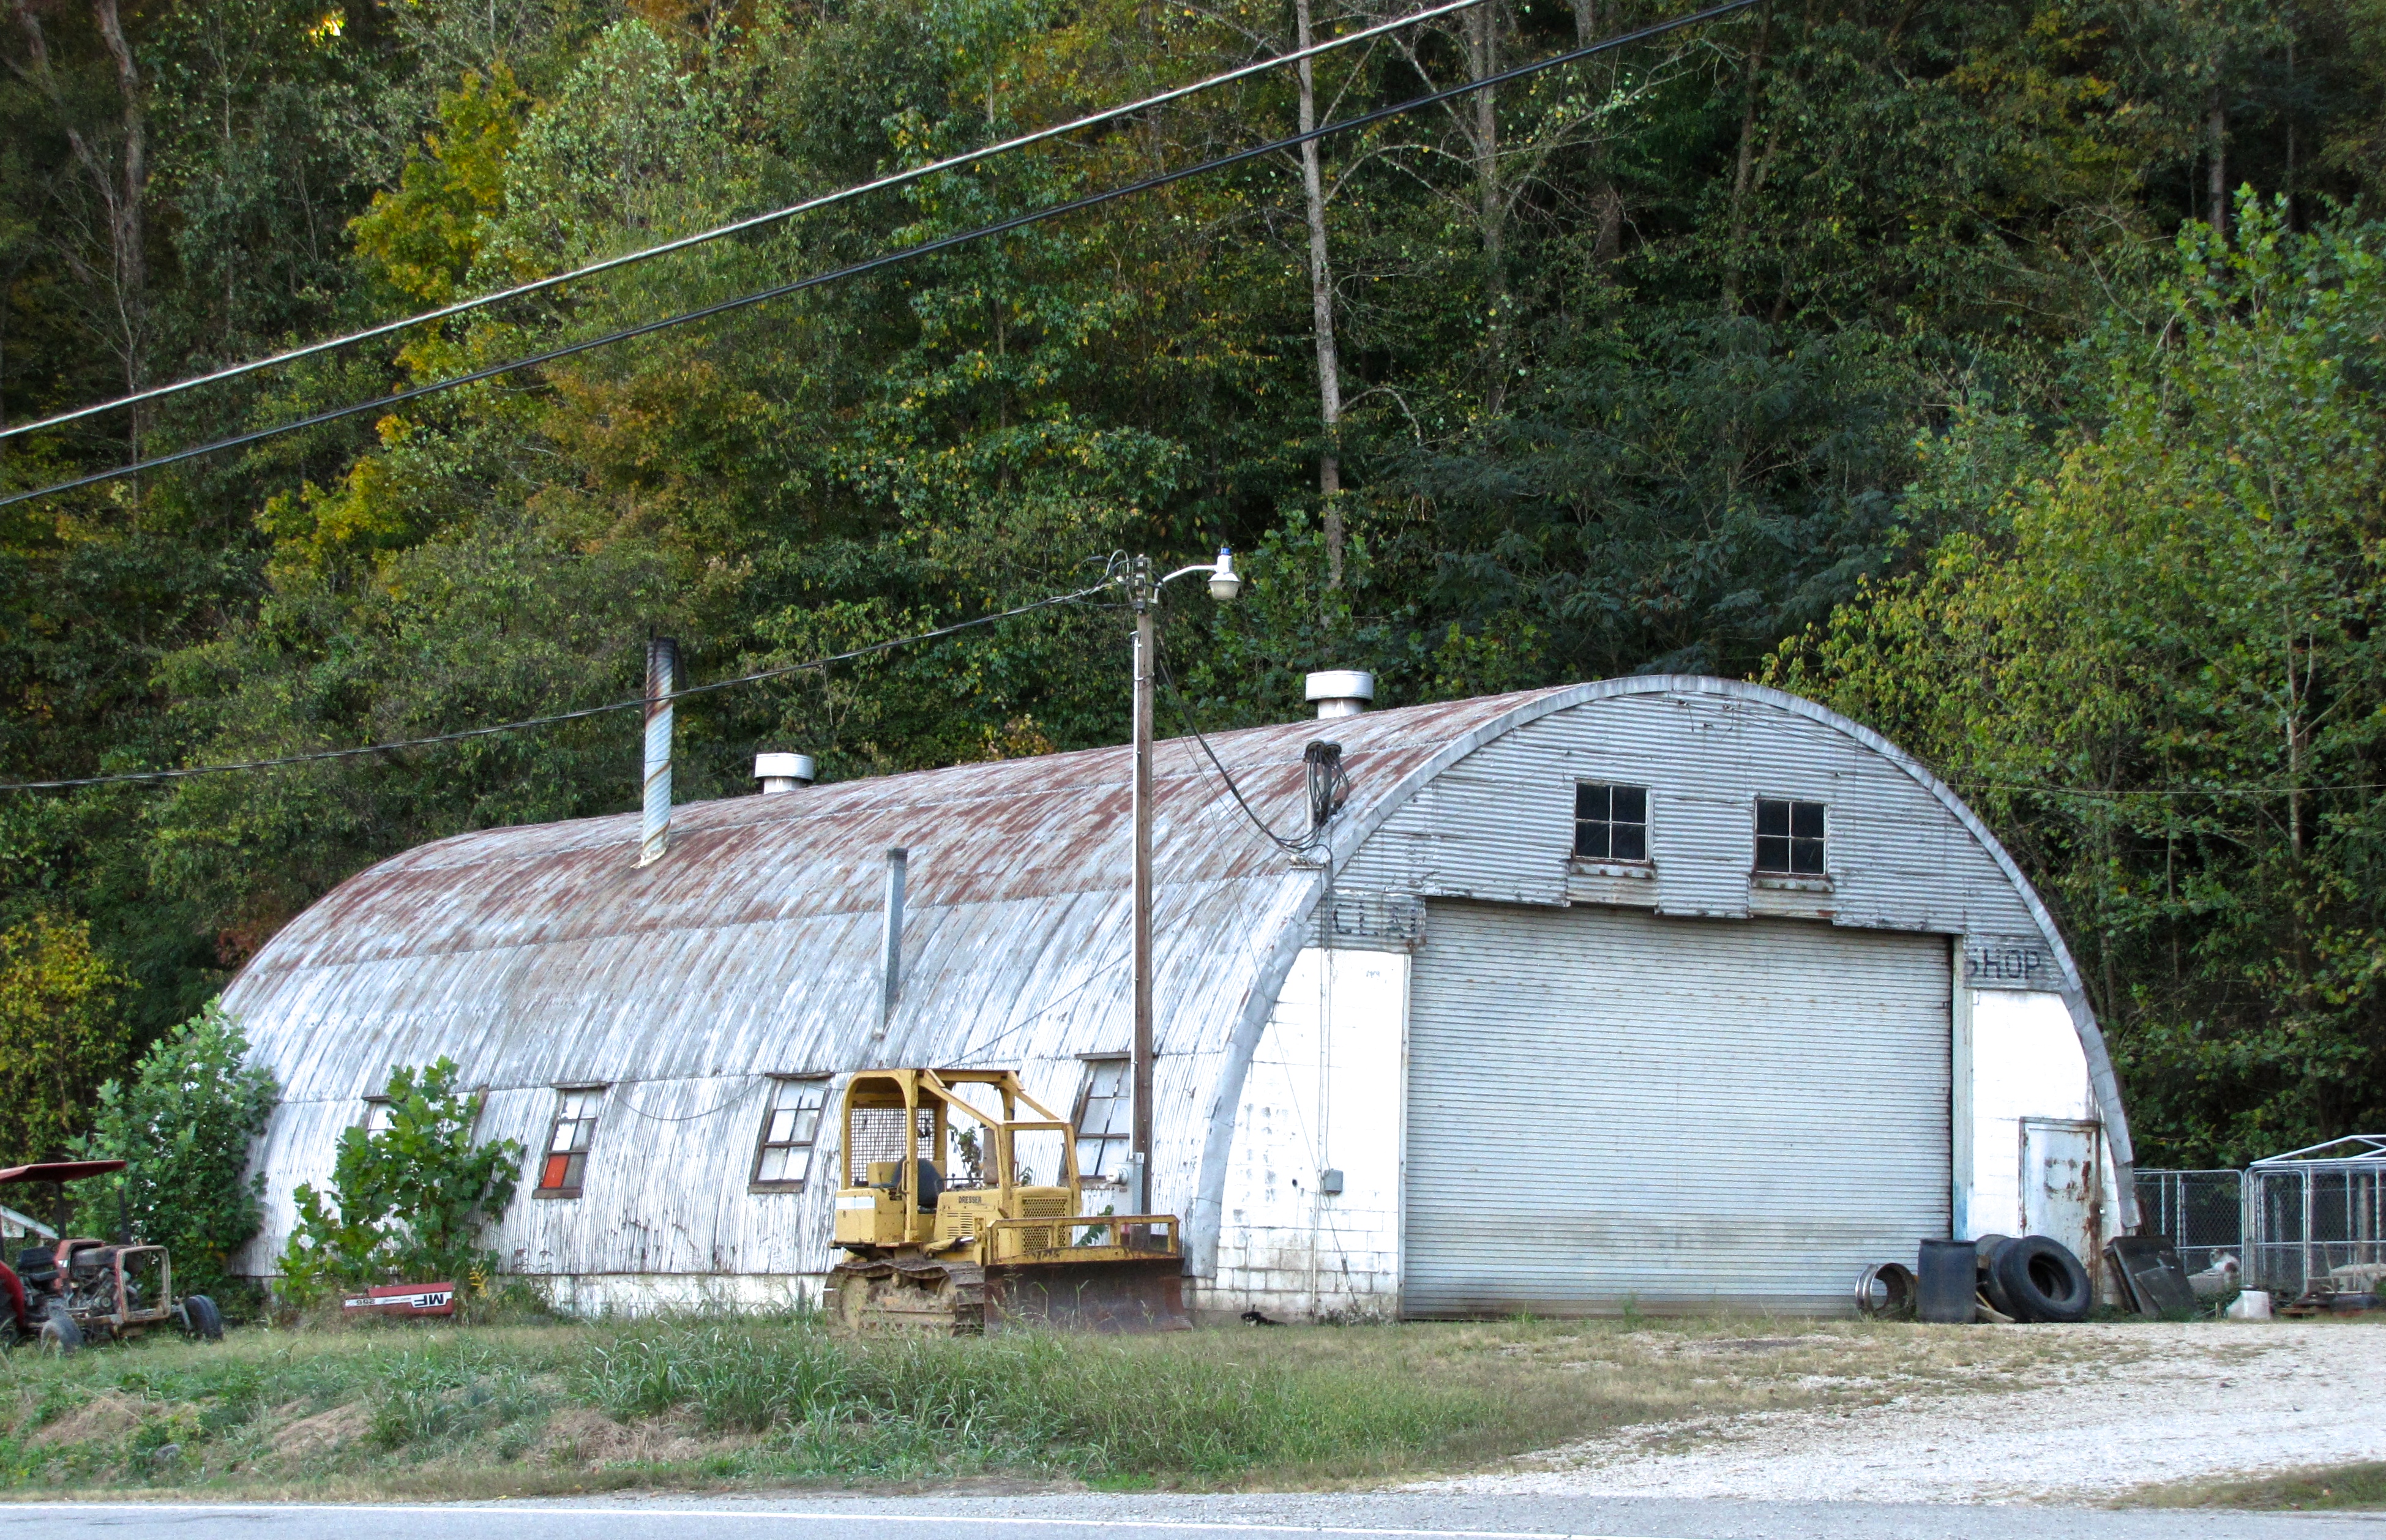 quonset hut in Privacy Policy, AL